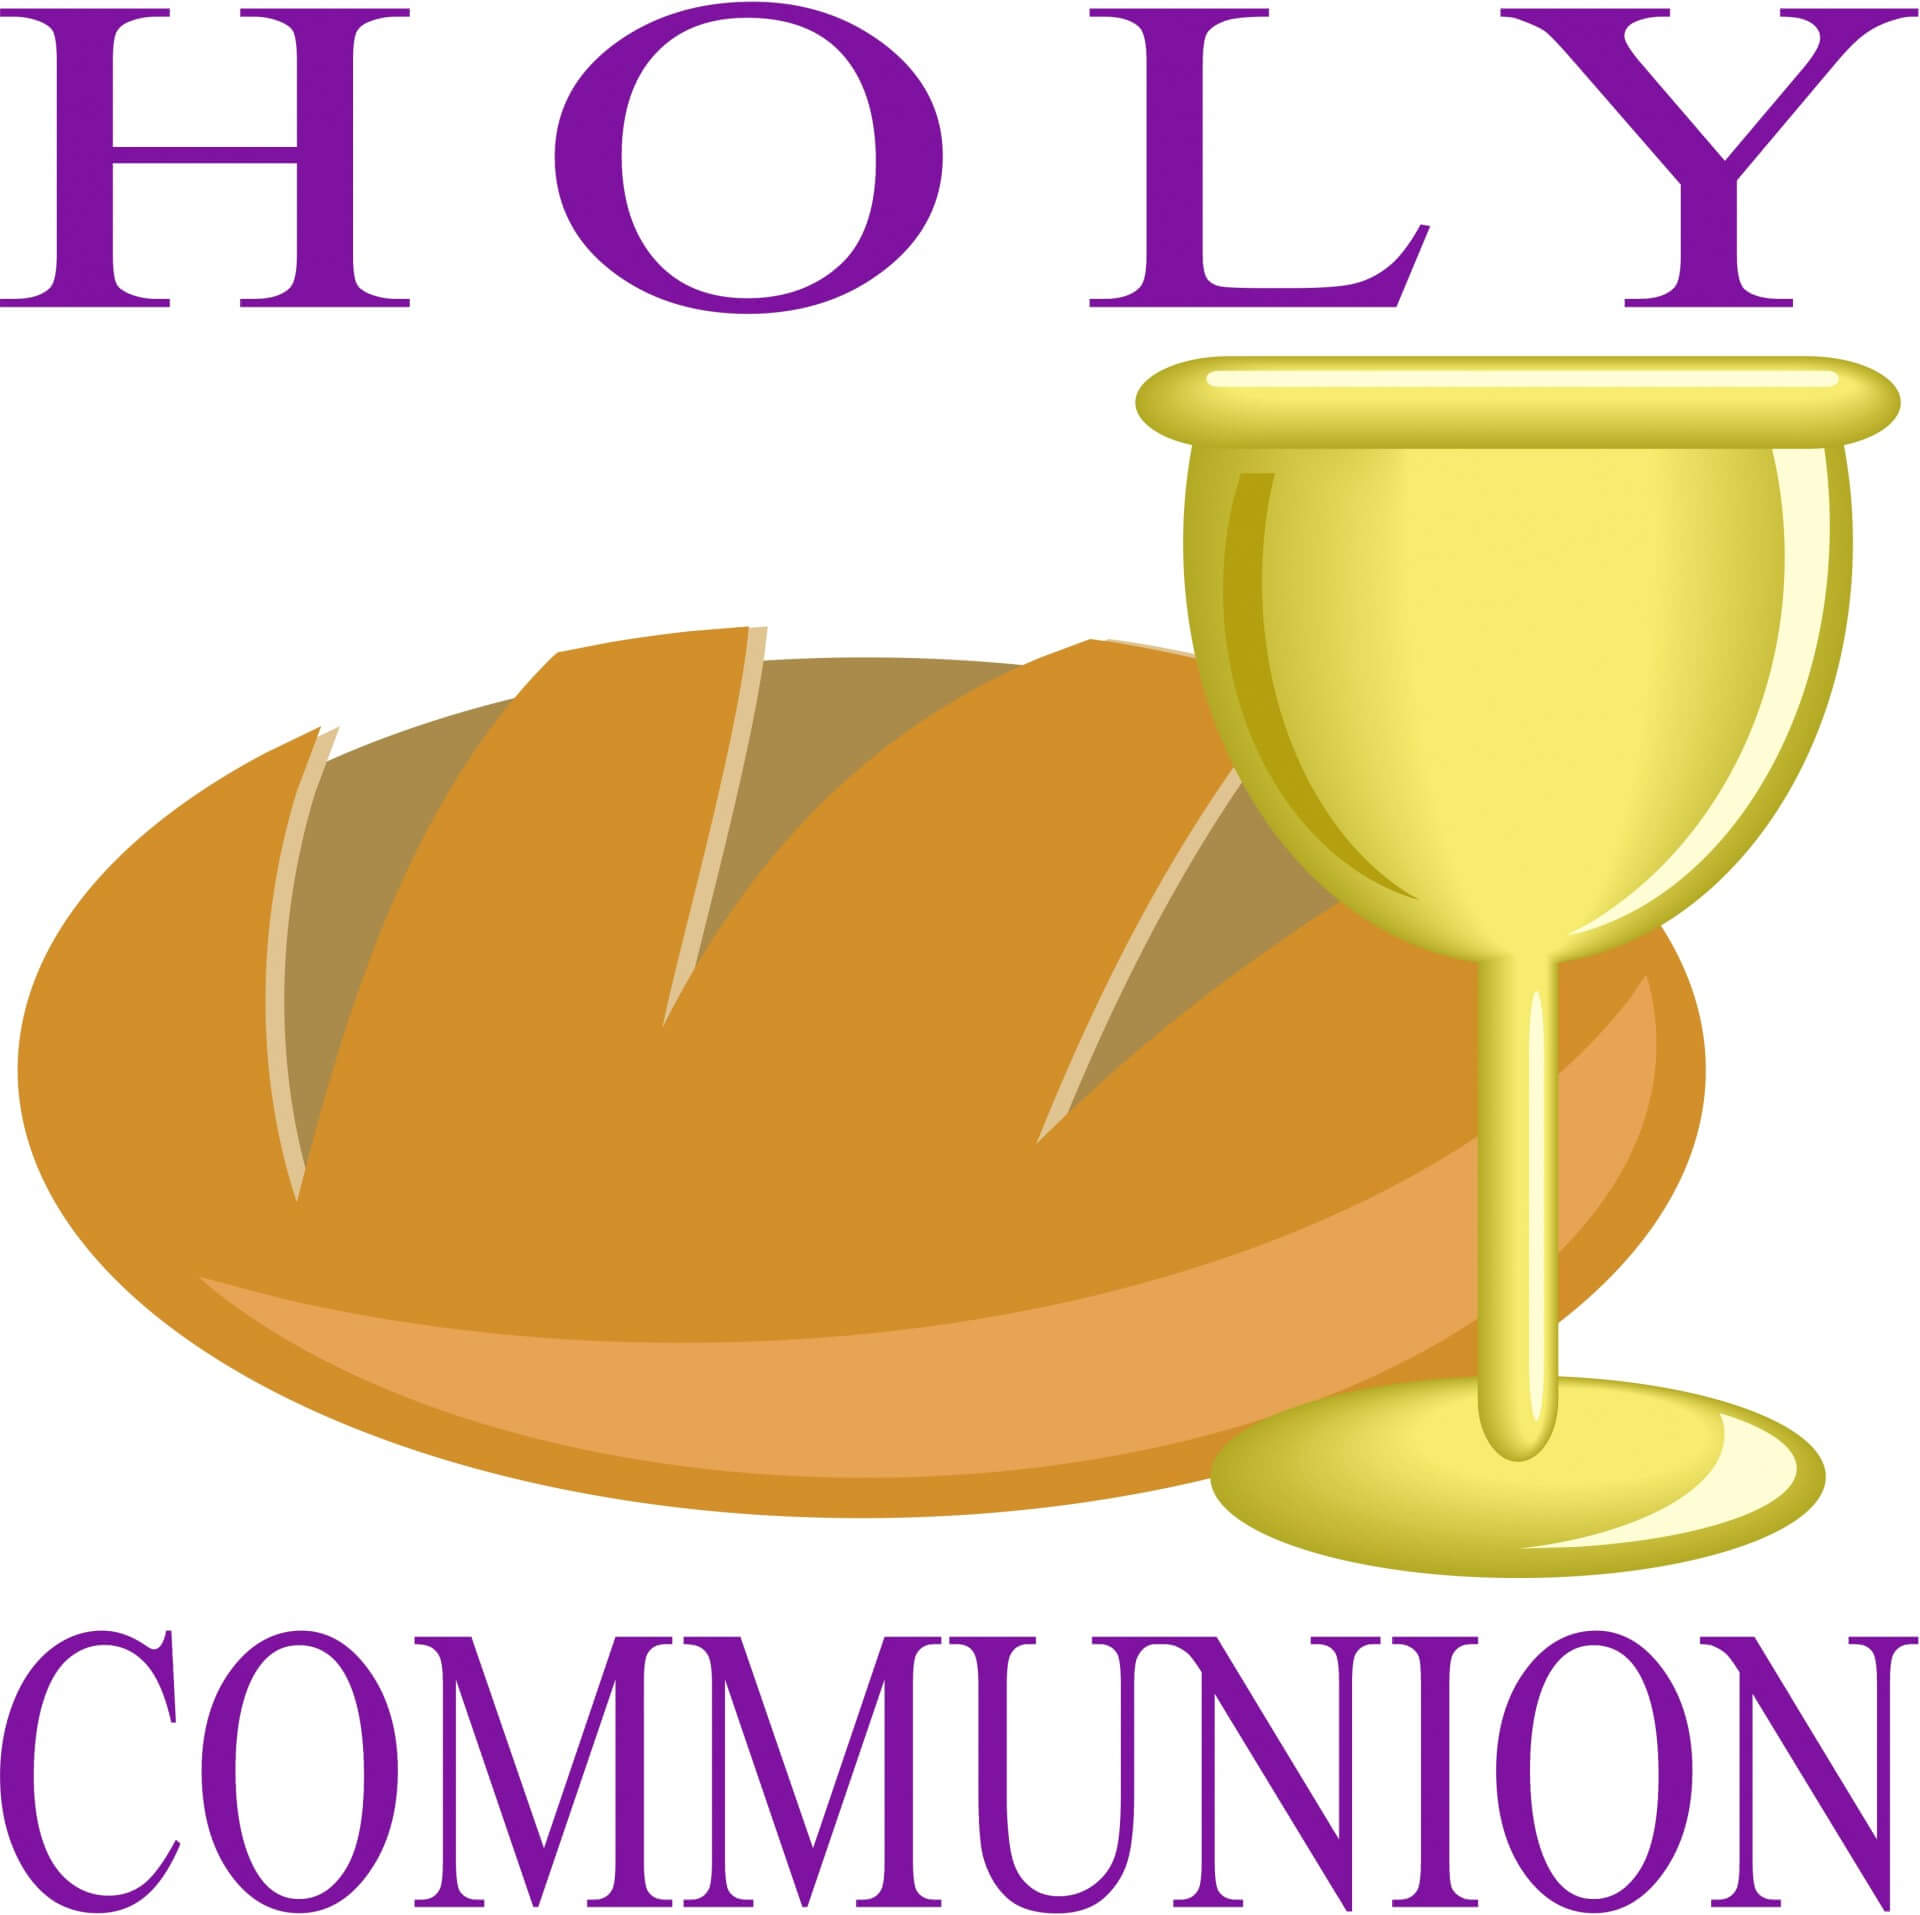 Free First Holy Communion Clip Art Banner Template Regarding First Holy Communion Banner Templates